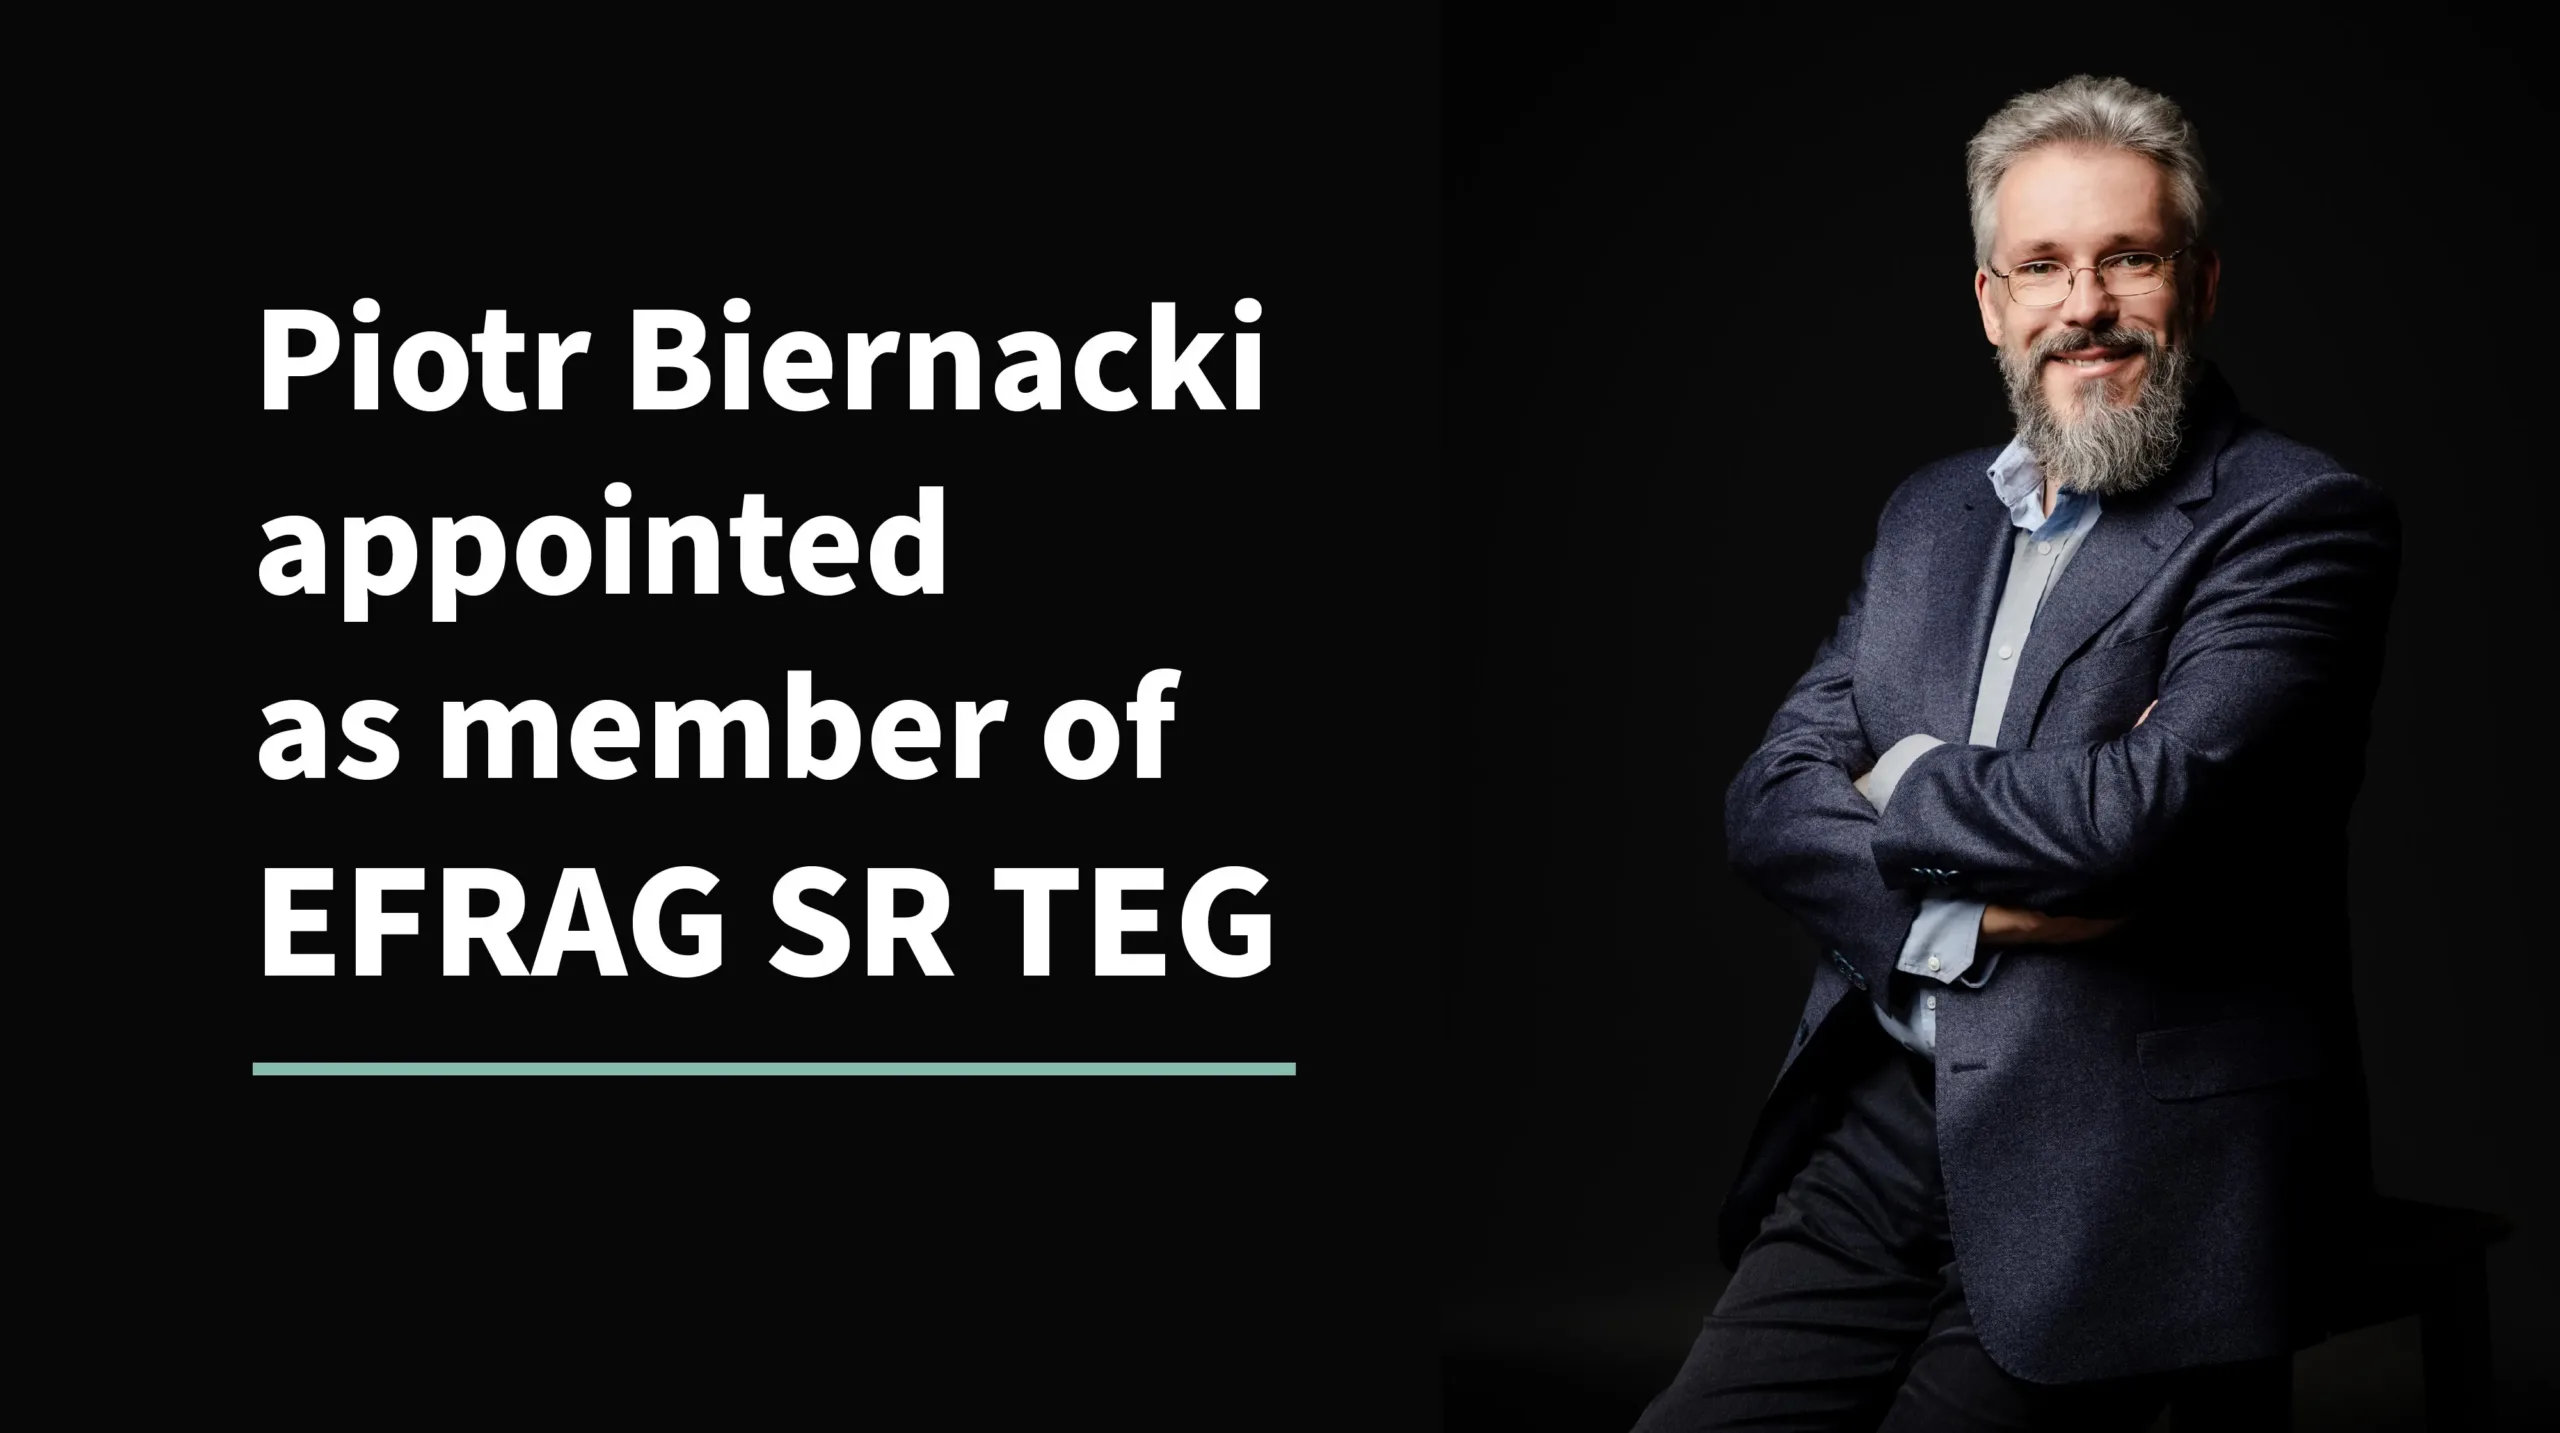 Piotr Biernacki, ESG Reporting Partner at MATERIALITY, has been appointed as member of Sustainability Reporting Technical Expert Group (SR TEG).